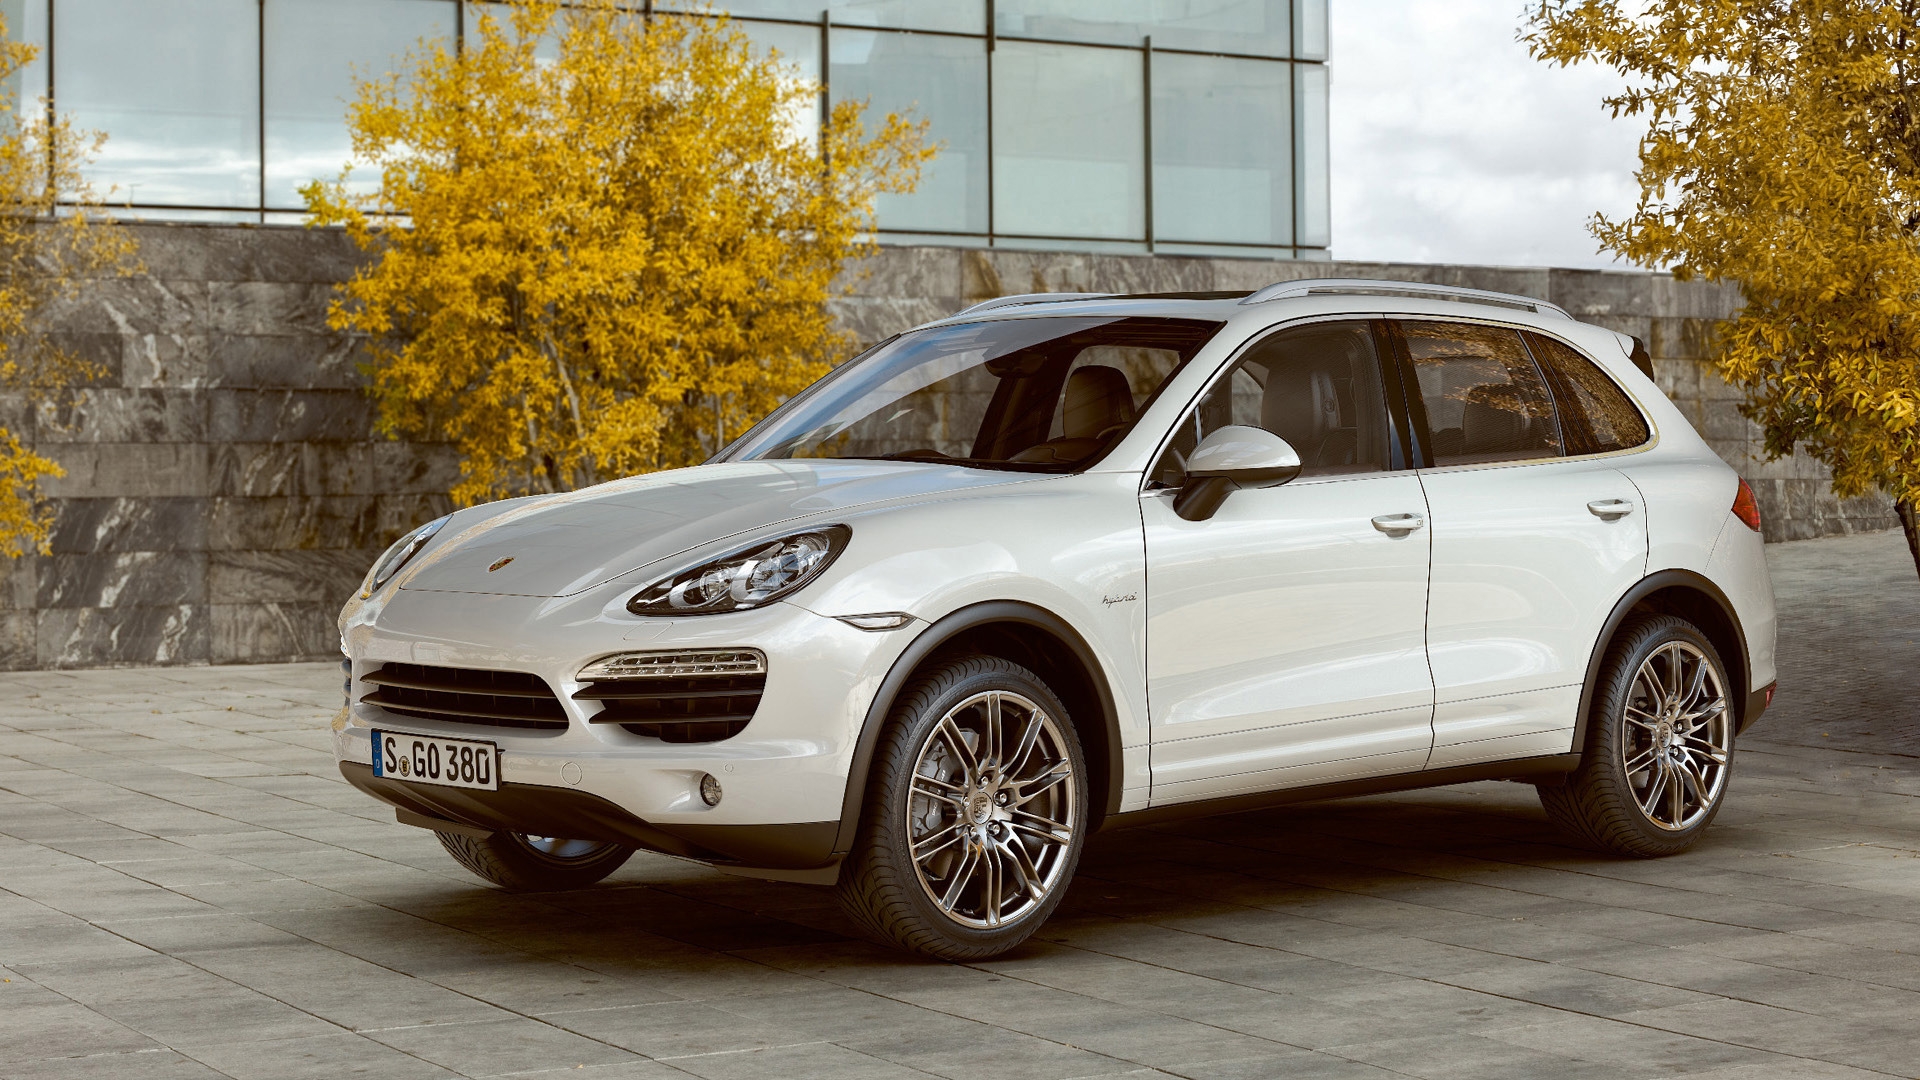 Porsche Cayenne S Hybrid 2011 Front And Side for 1920 x 1080 HDTV 1080p resolution